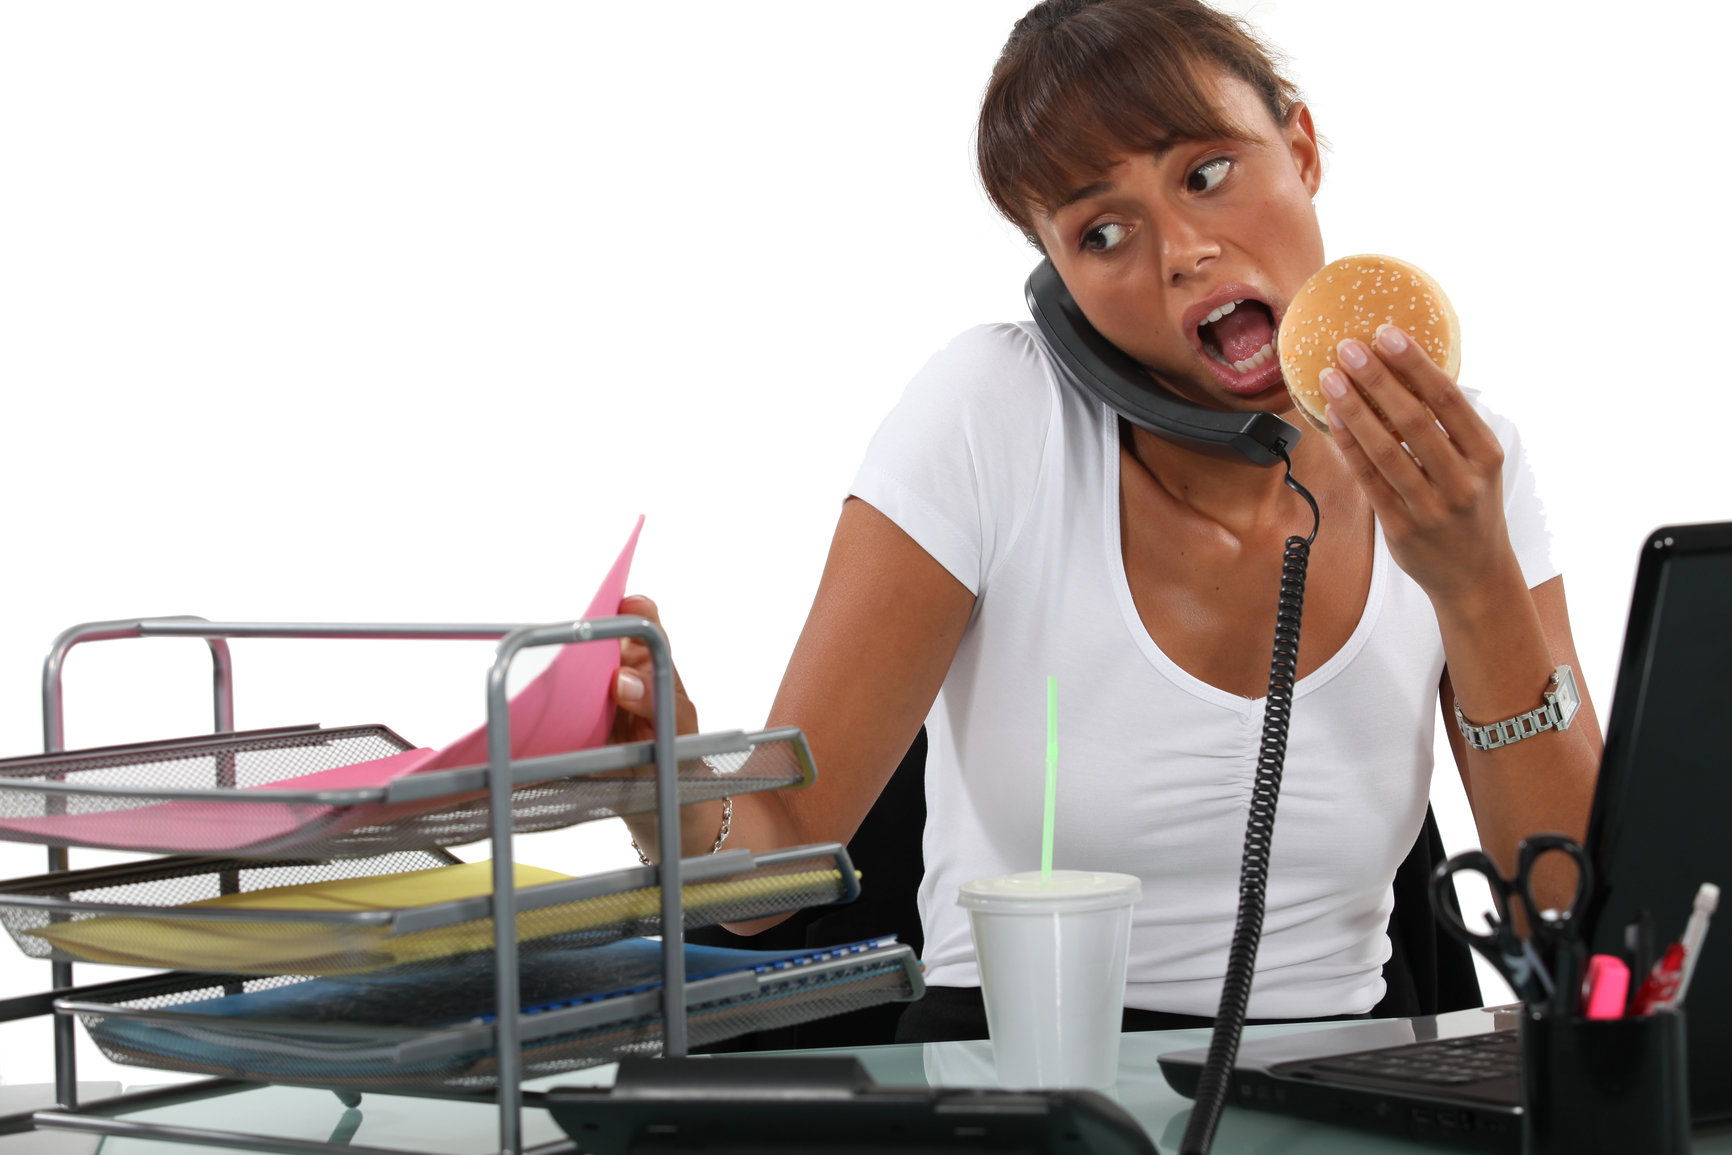 Busy woman eating at her desk